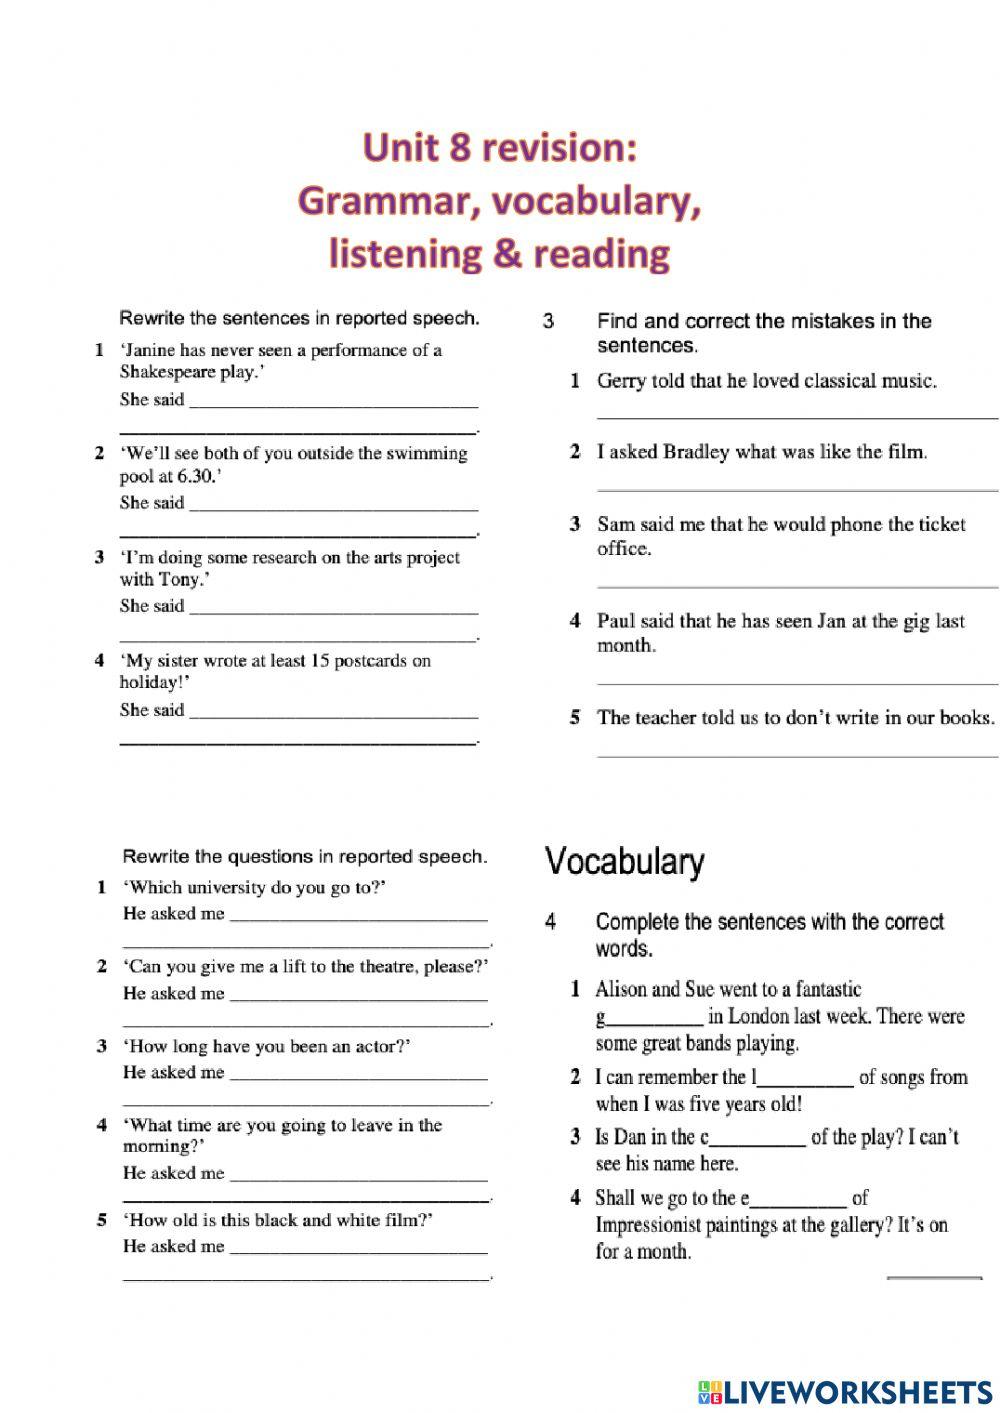 Grammar and vocabulary revision unit 8